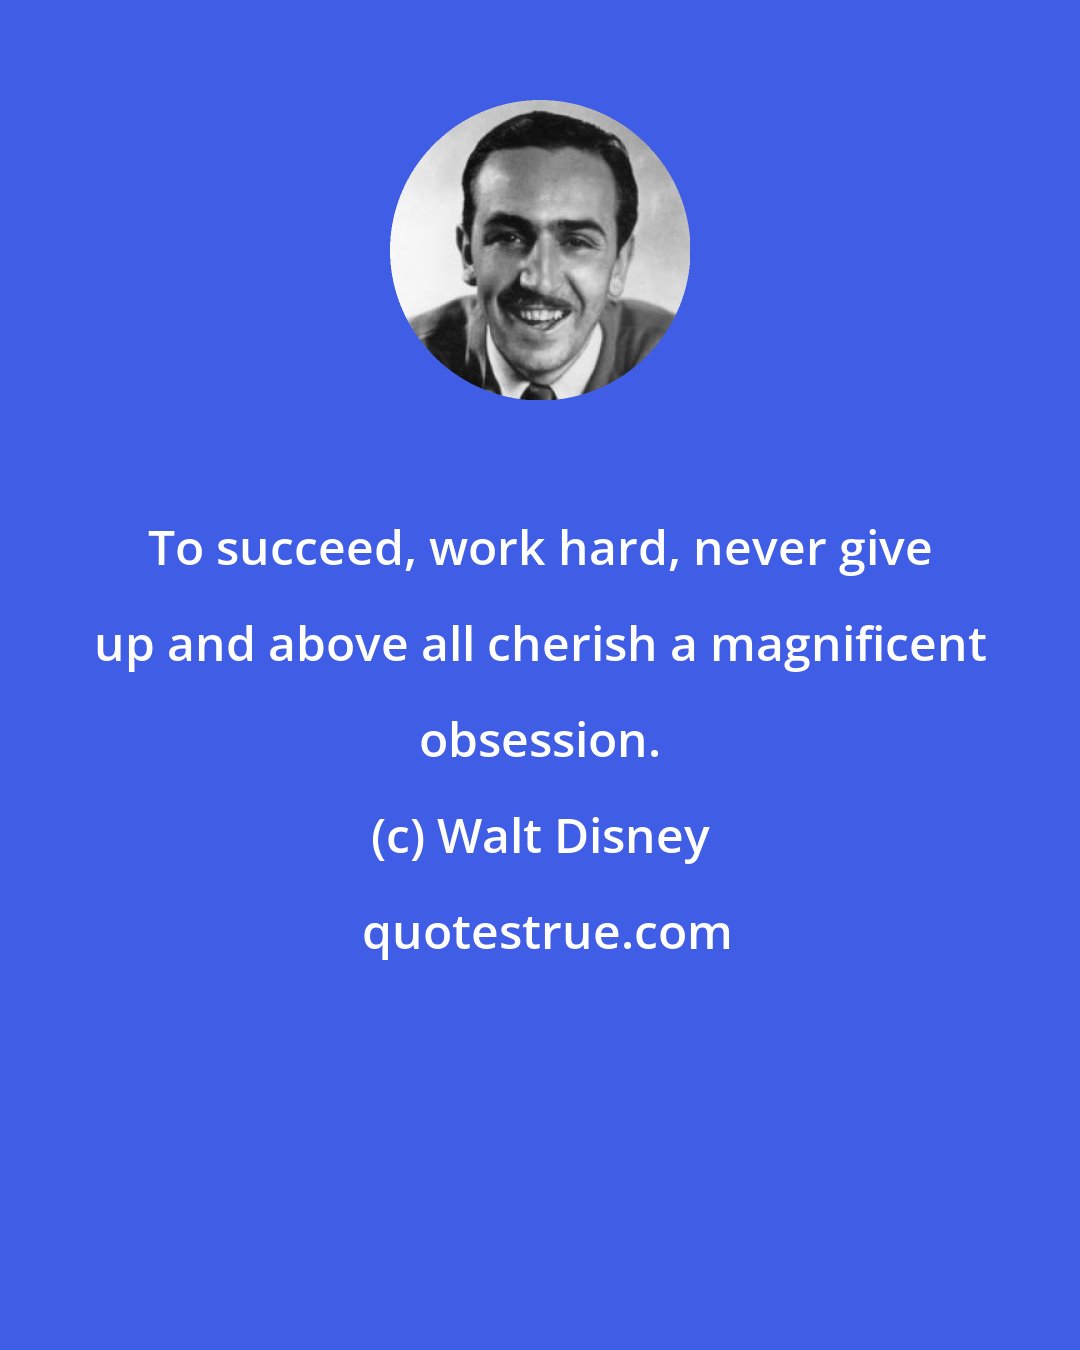 Walt Disney: To succeed, work hard, never give up and above all cherish a magnificent obsession.